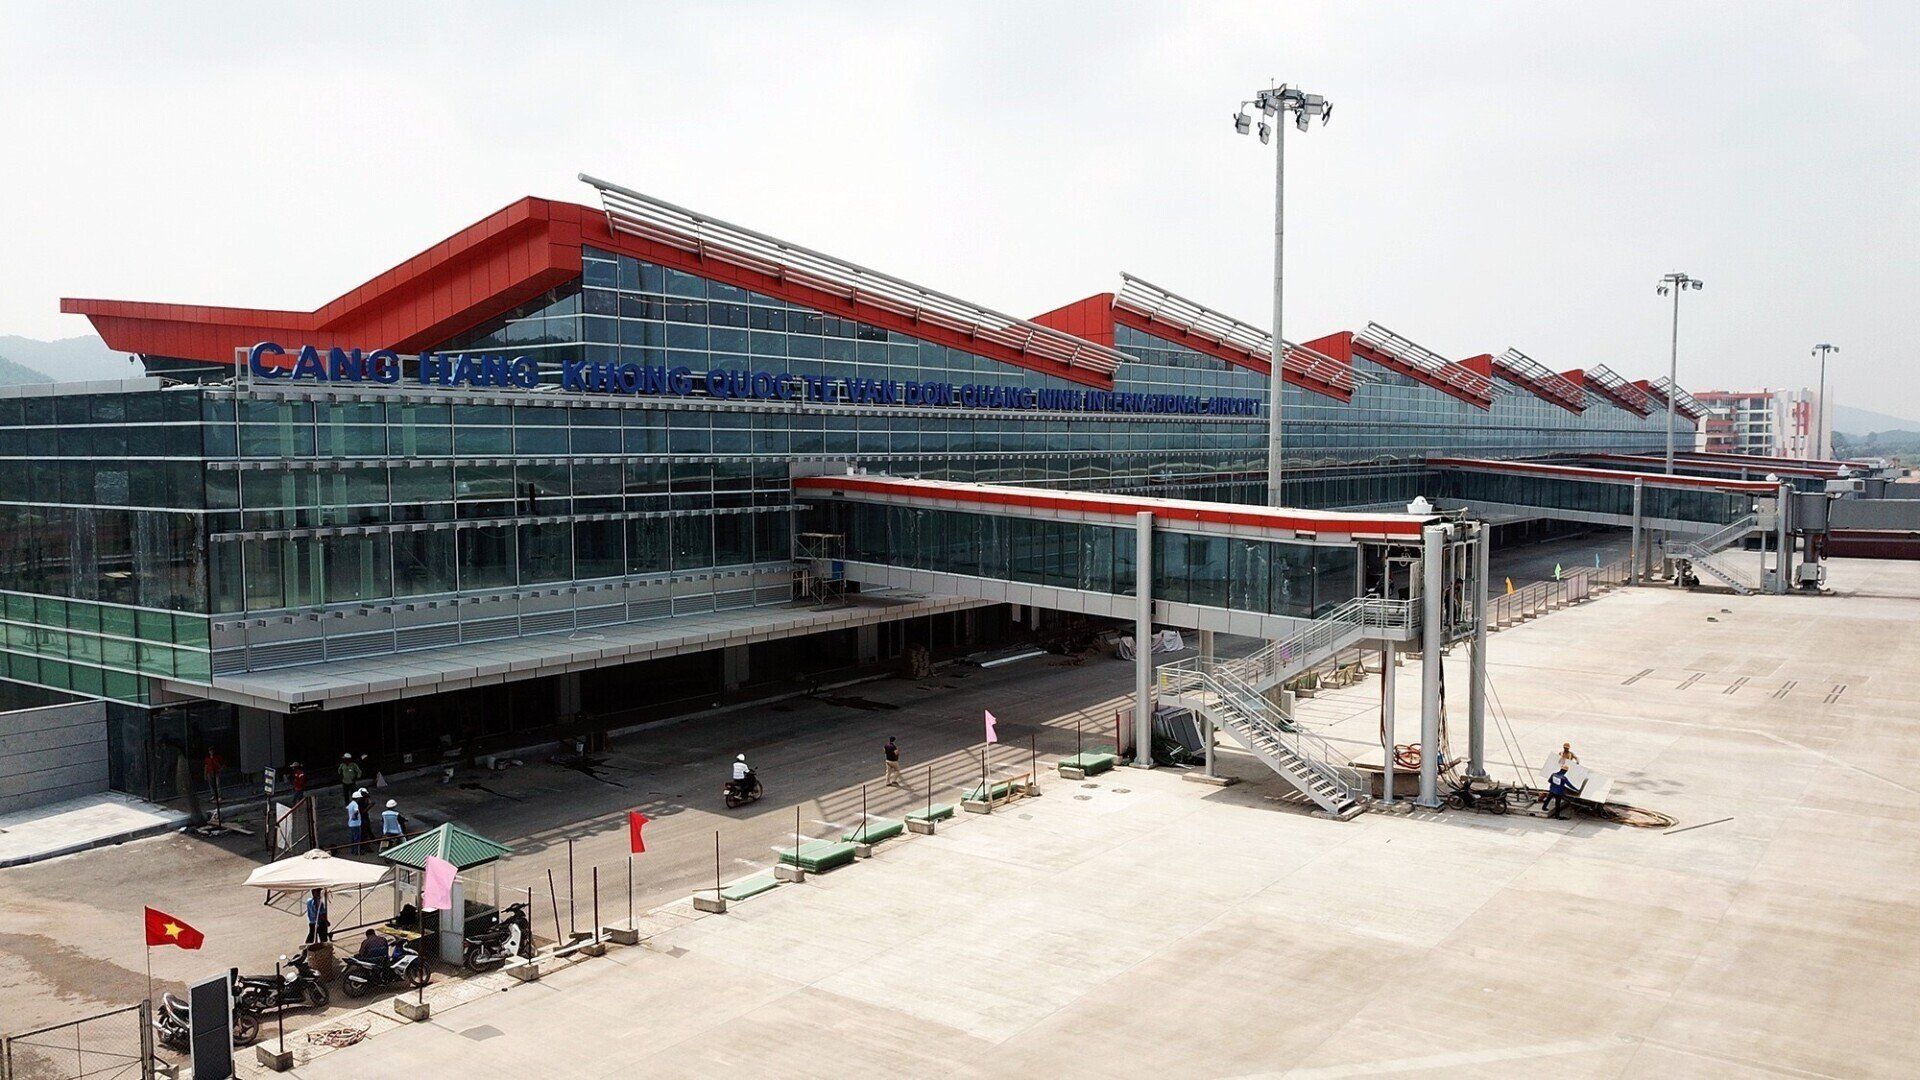 An aerial view of a large airport building with a red roof